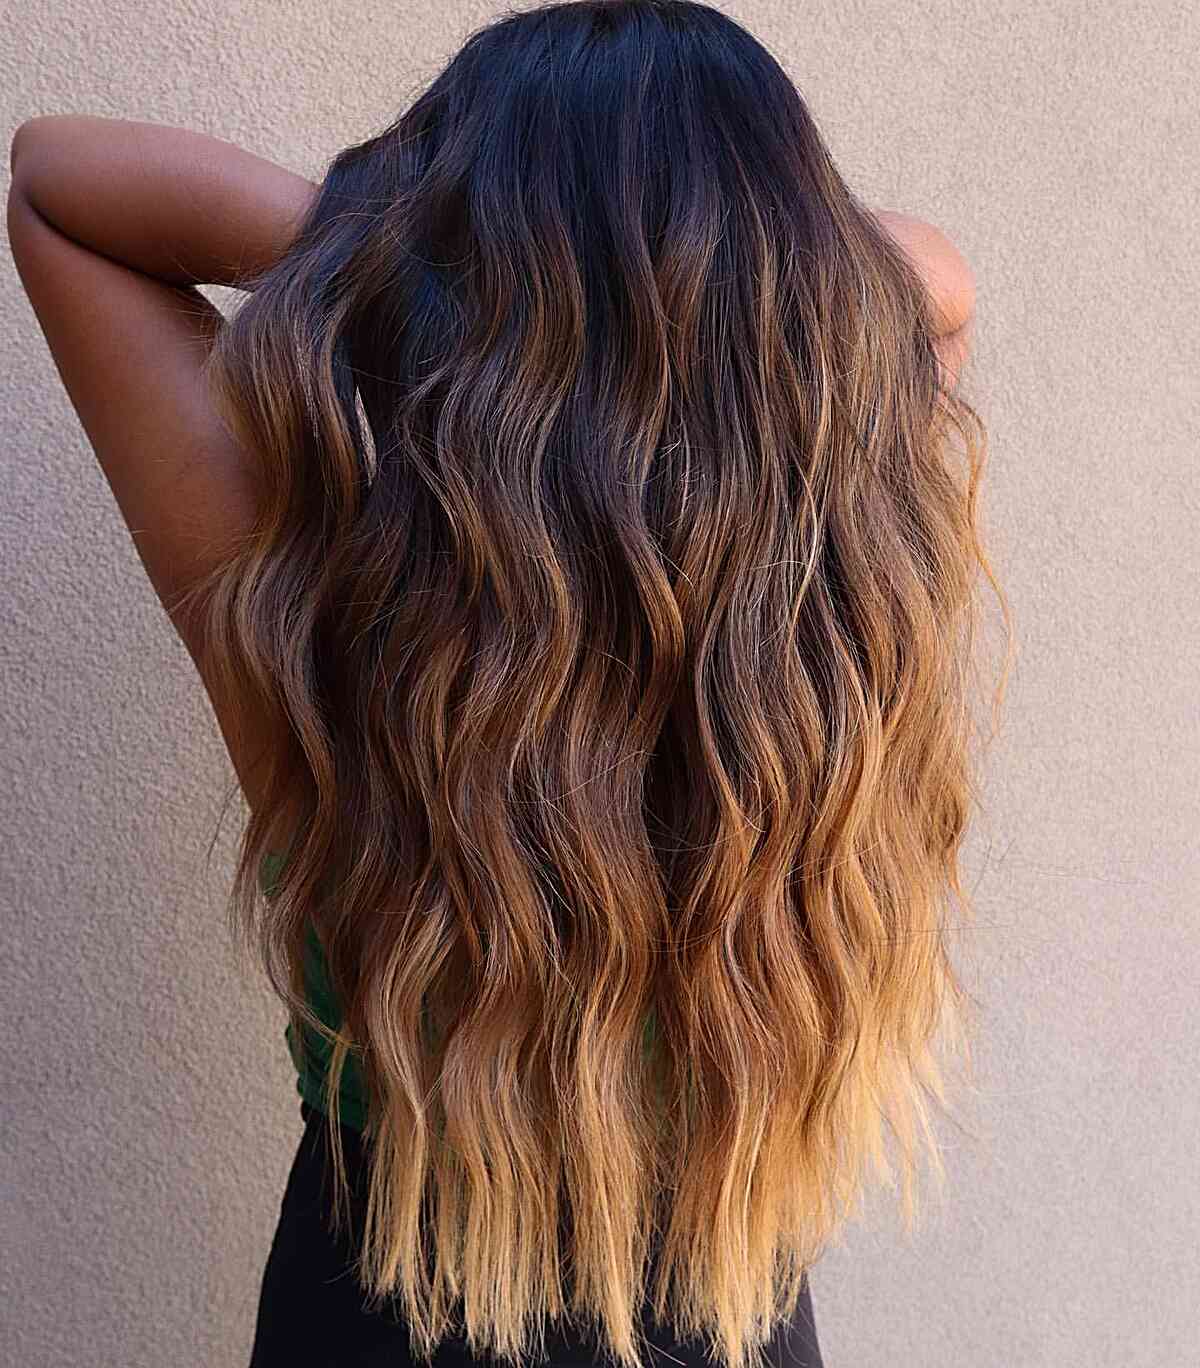 Long Ombre Dark Brunette Roots to Light Blonde Tips with Waves and Blunt Ends